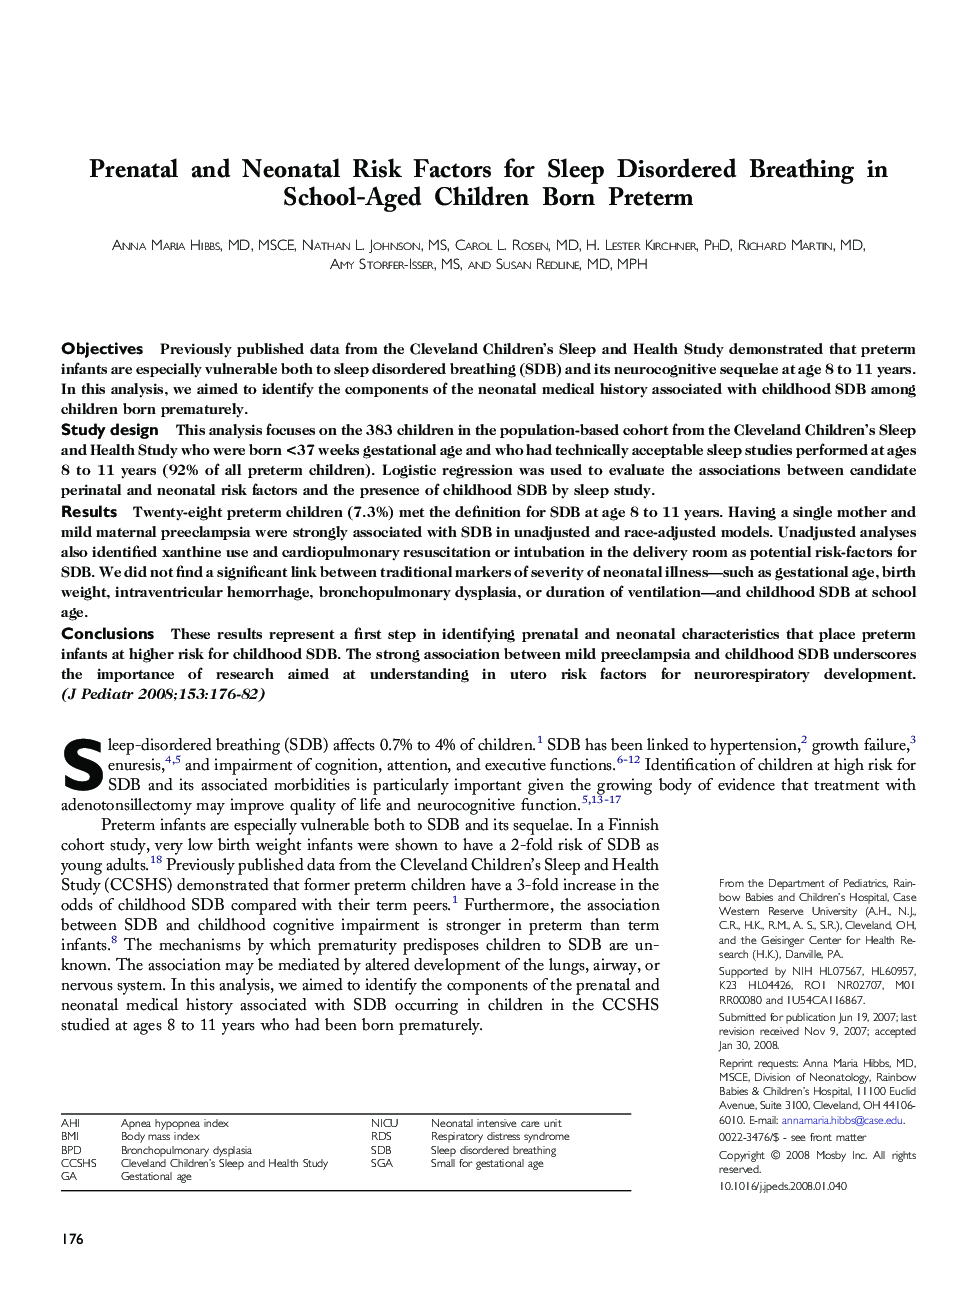 Prenatal and Neonatal Risk Factors for Sleep Disordered Breathing in School-Aged Children Born Preterm 